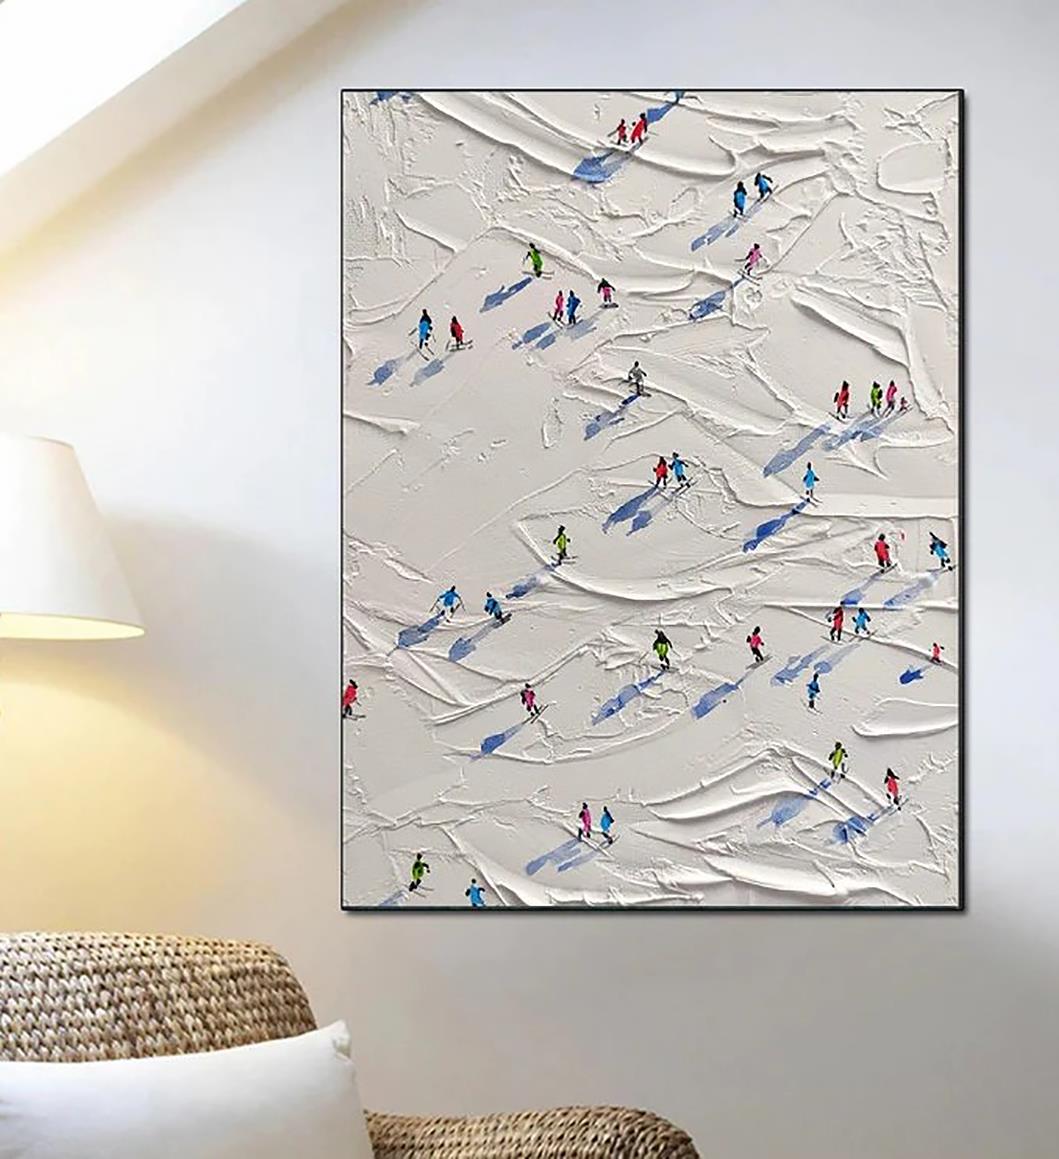 Skier on Snowy Mountain Wall Art Sport White Snow Skiing Room Decor by Knife 12 Oil Paintings